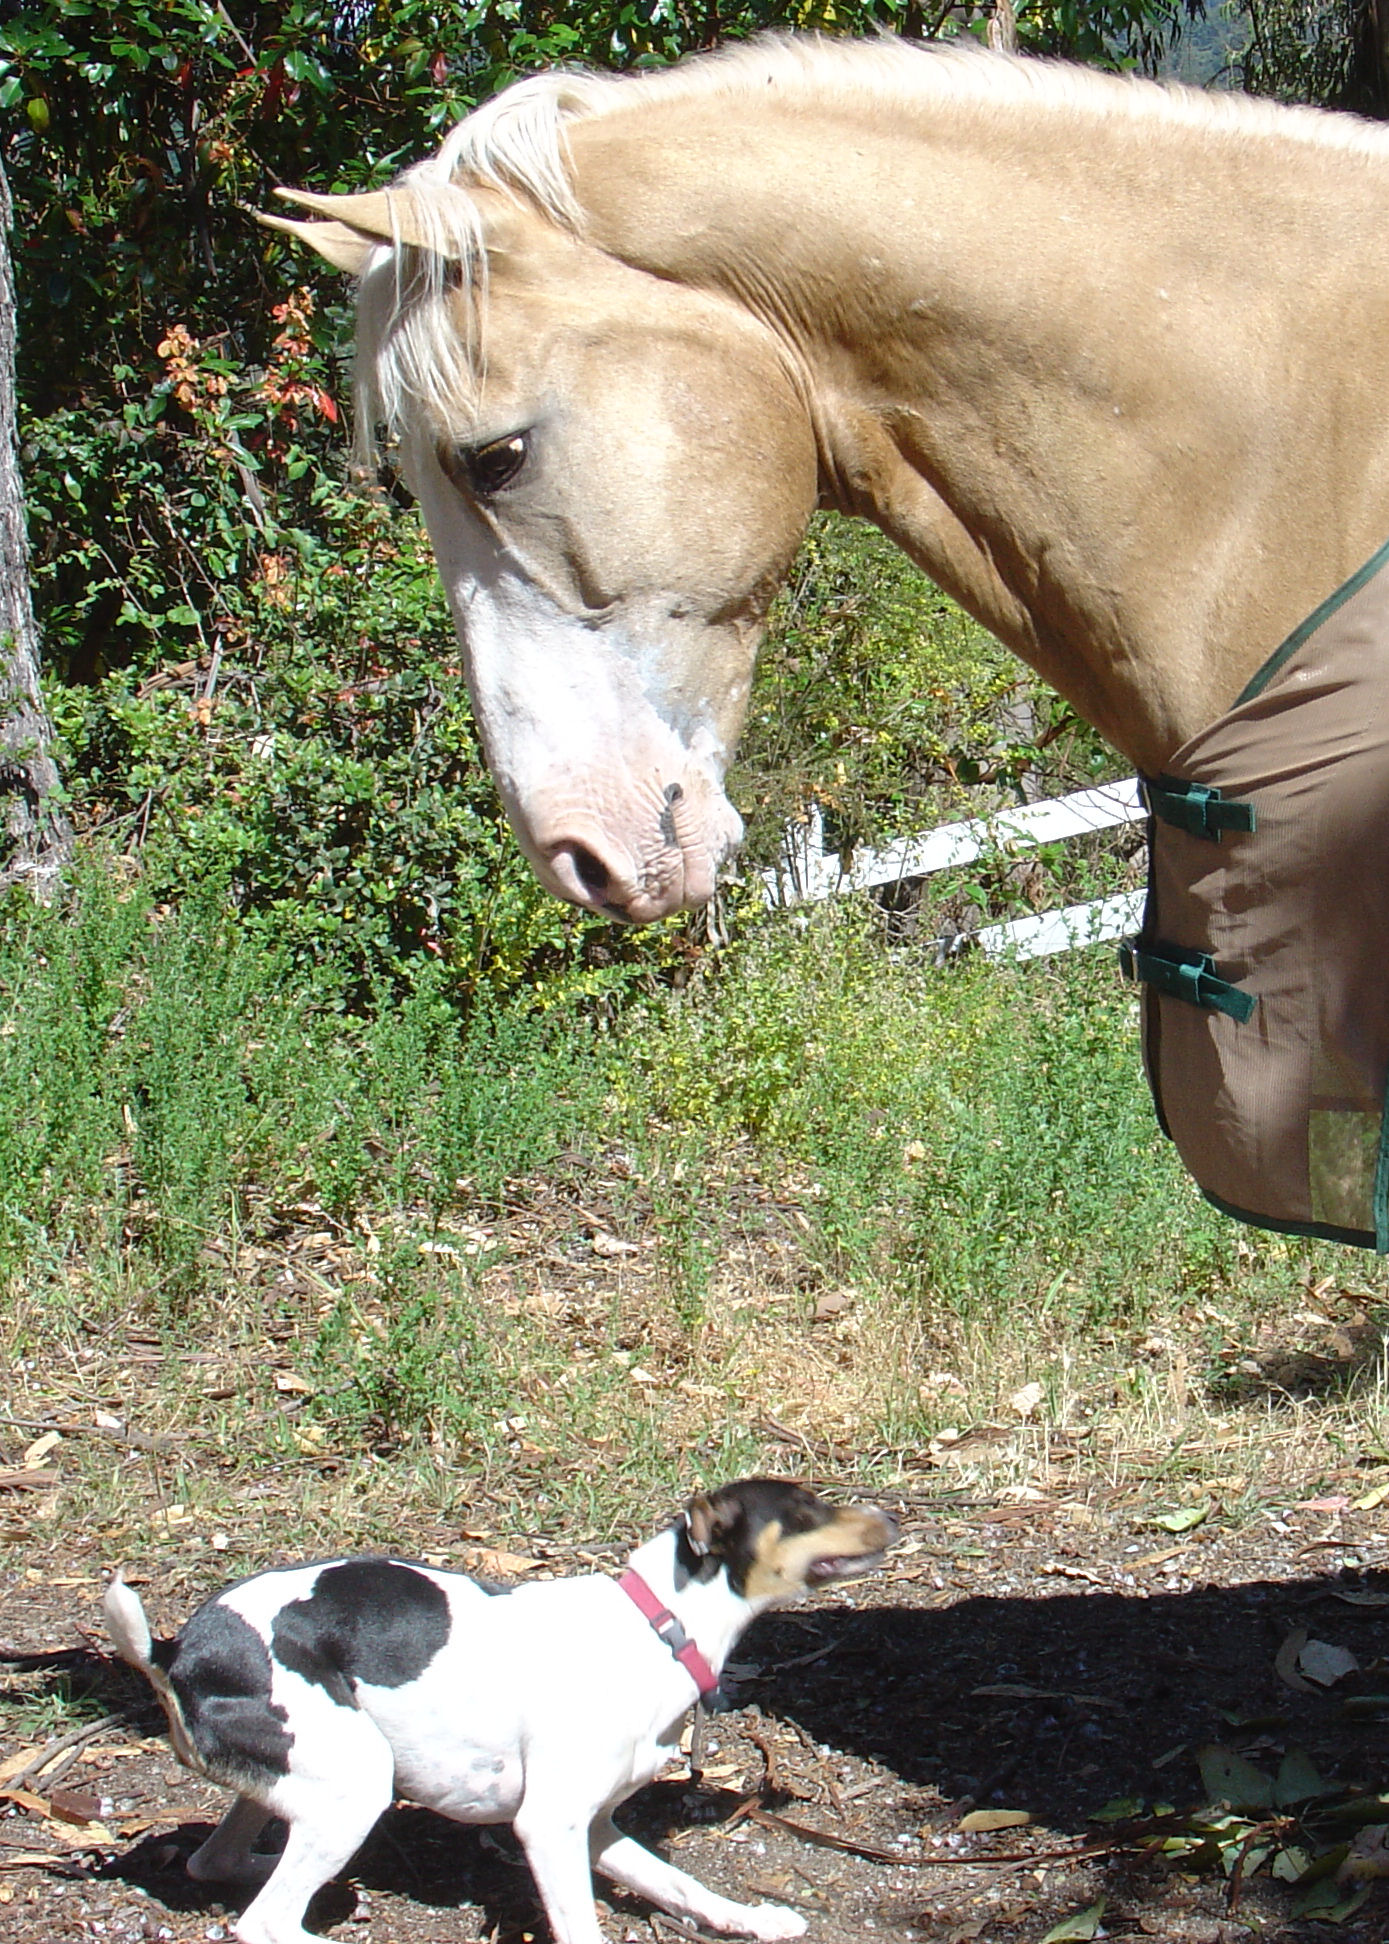 dog walking next to the horse outside of its pen